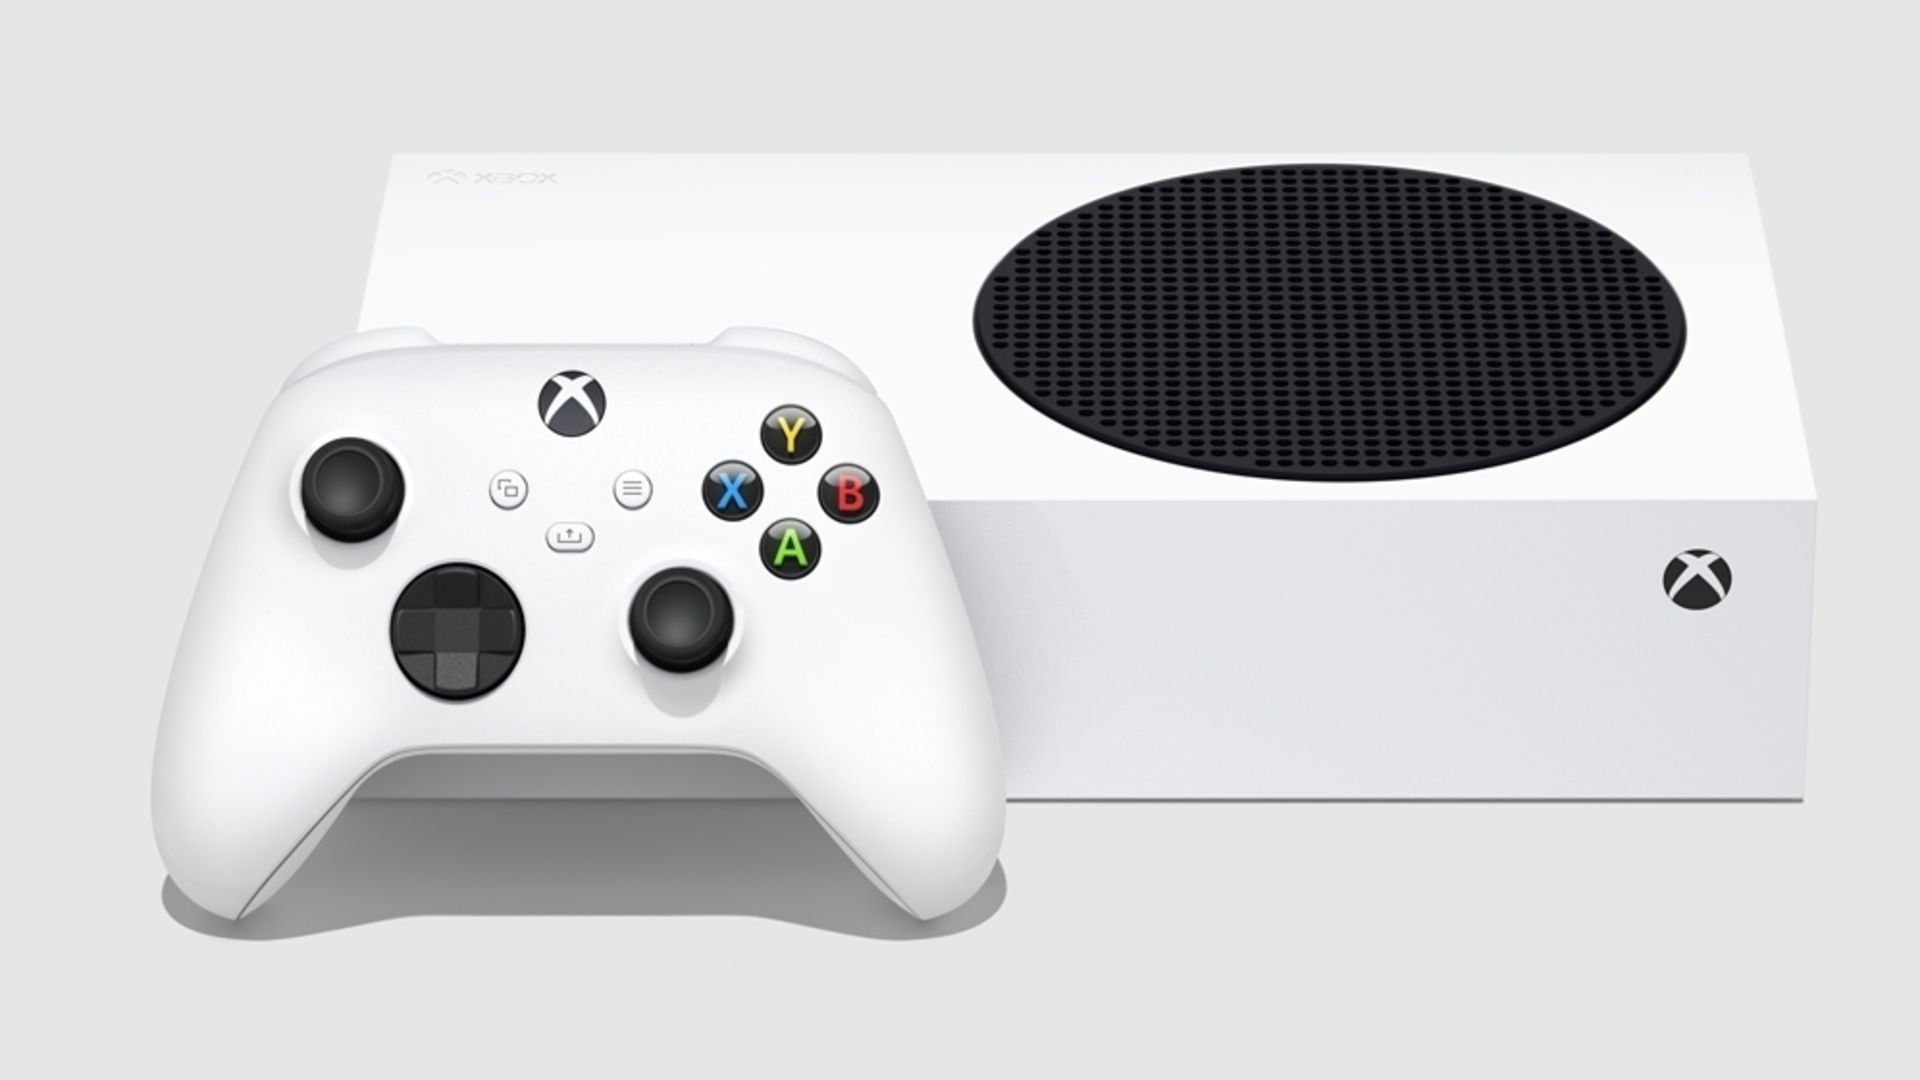 Microsoft leak reveals most current-gen Xbox owners have the Series S